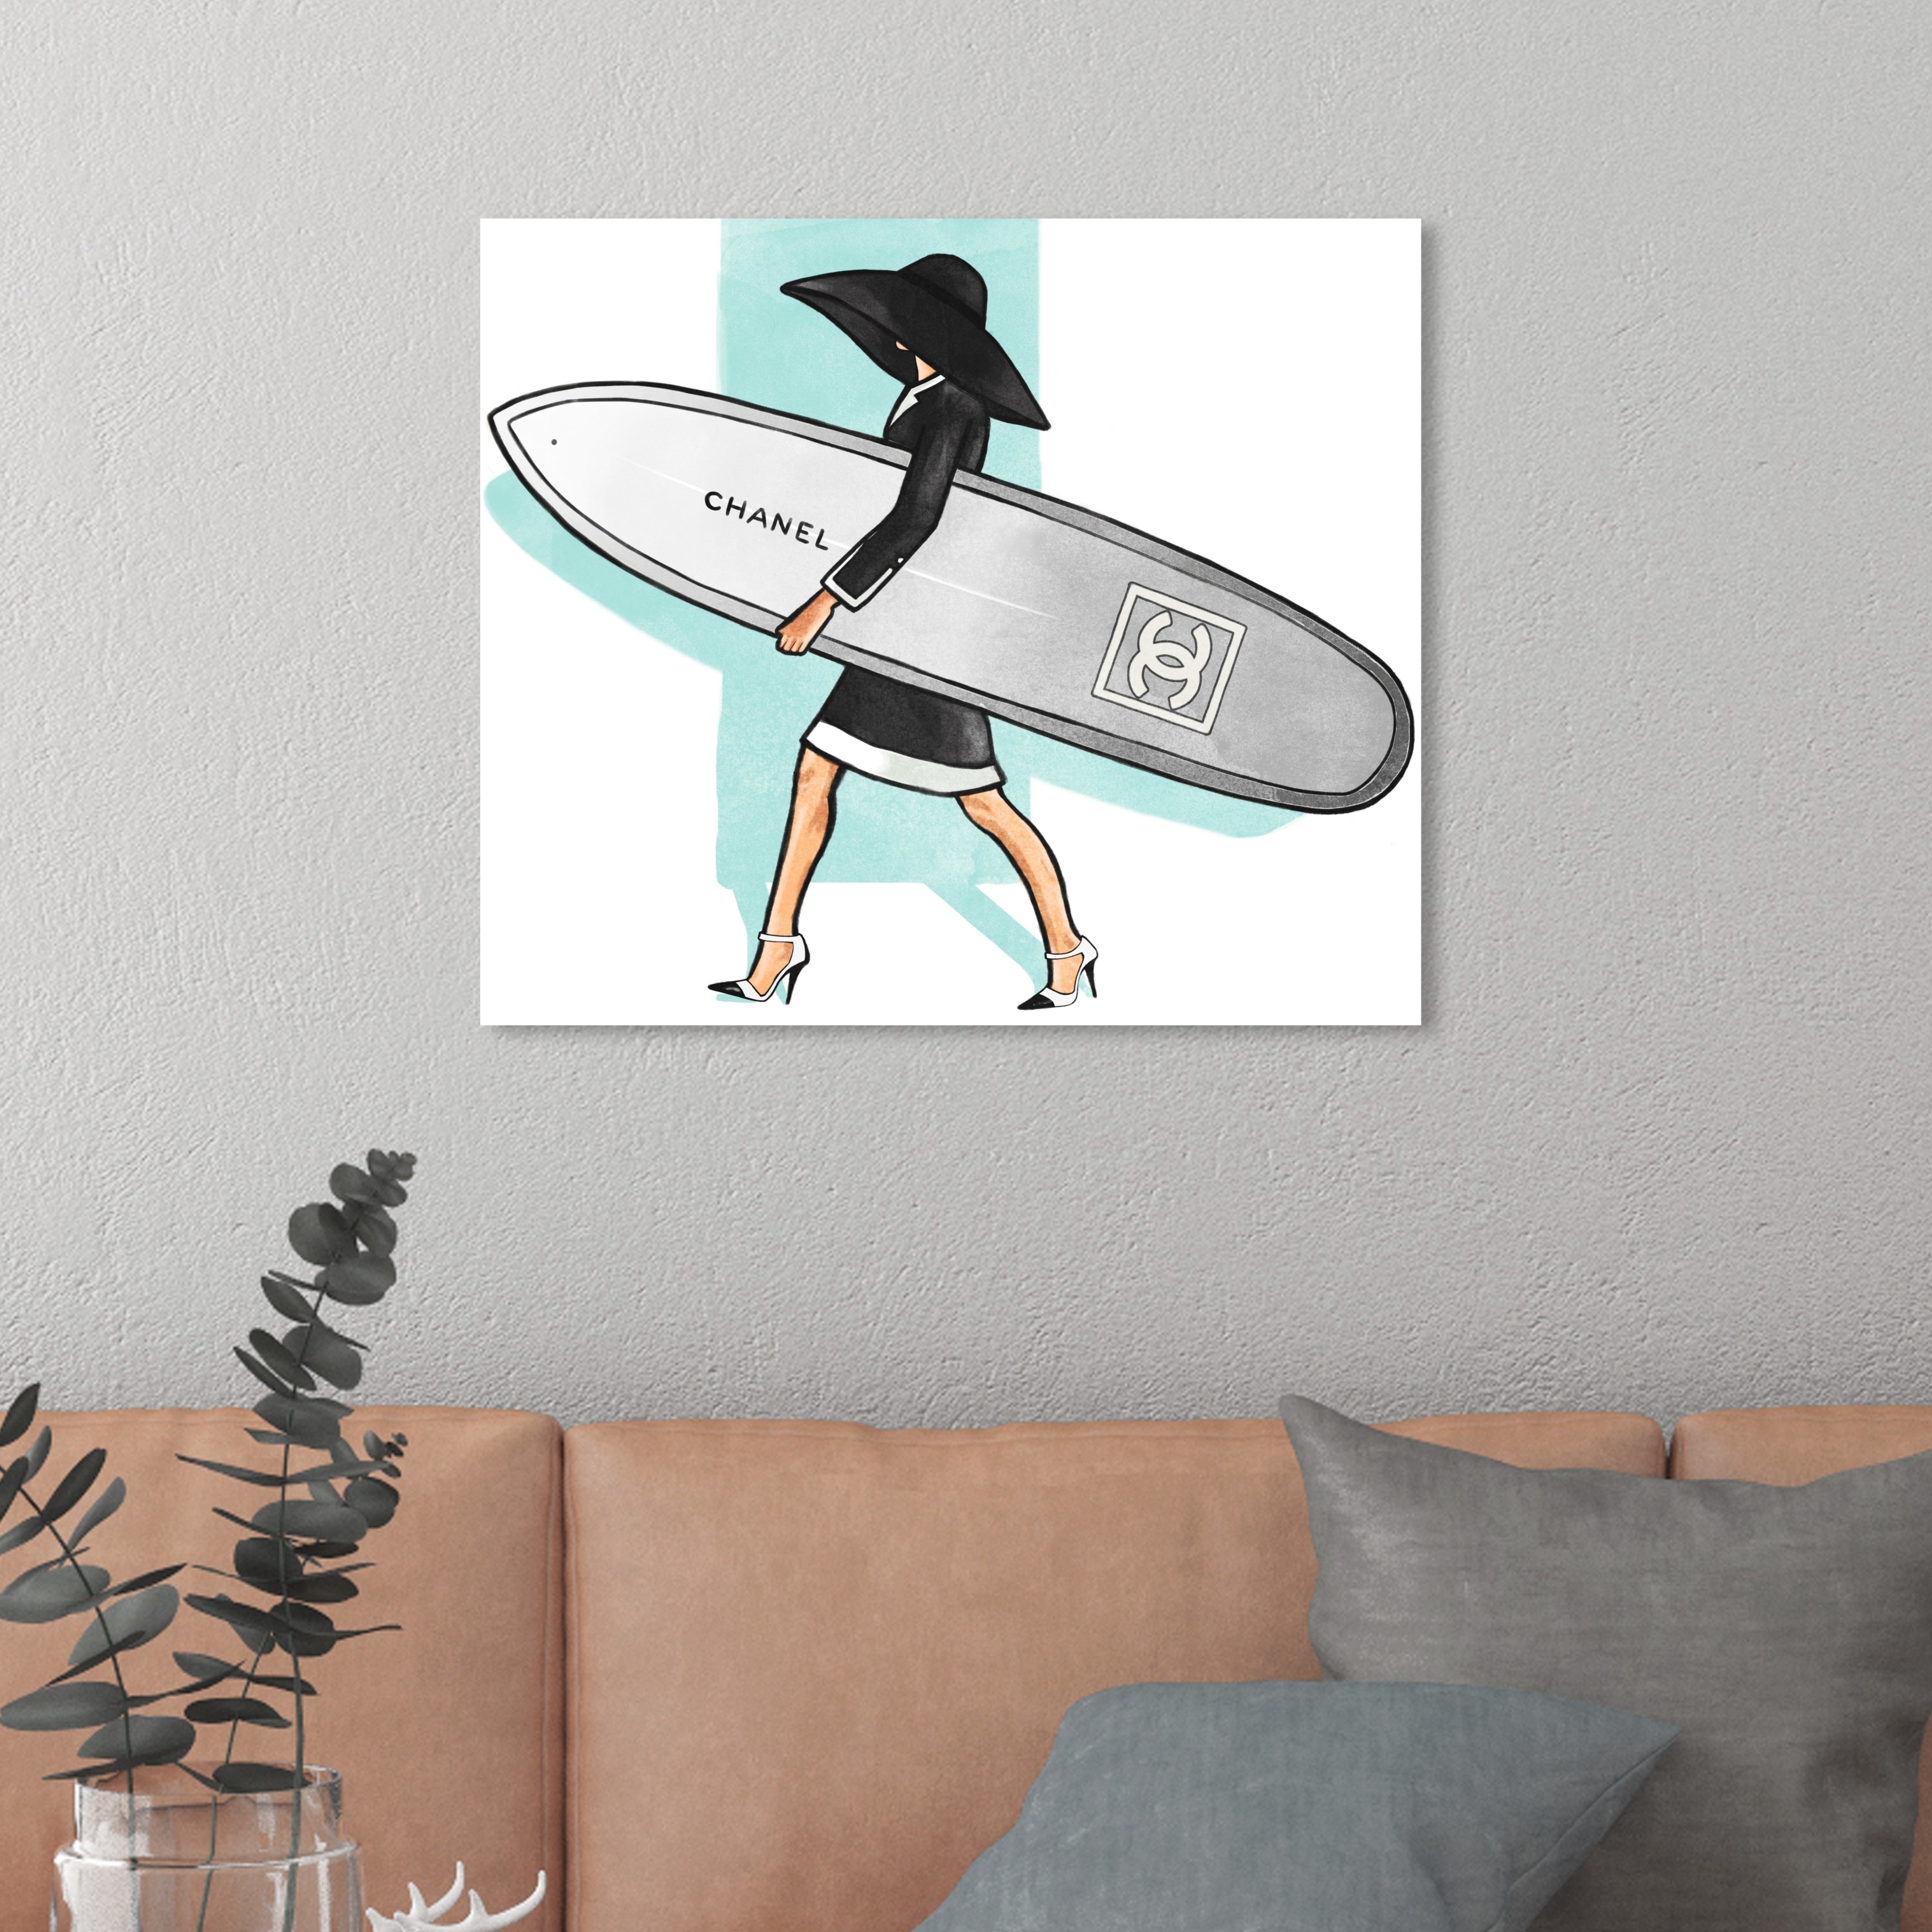 Oliver Gal Fashion and Glam Wall Art Canvas Prints 'Surfer Girl